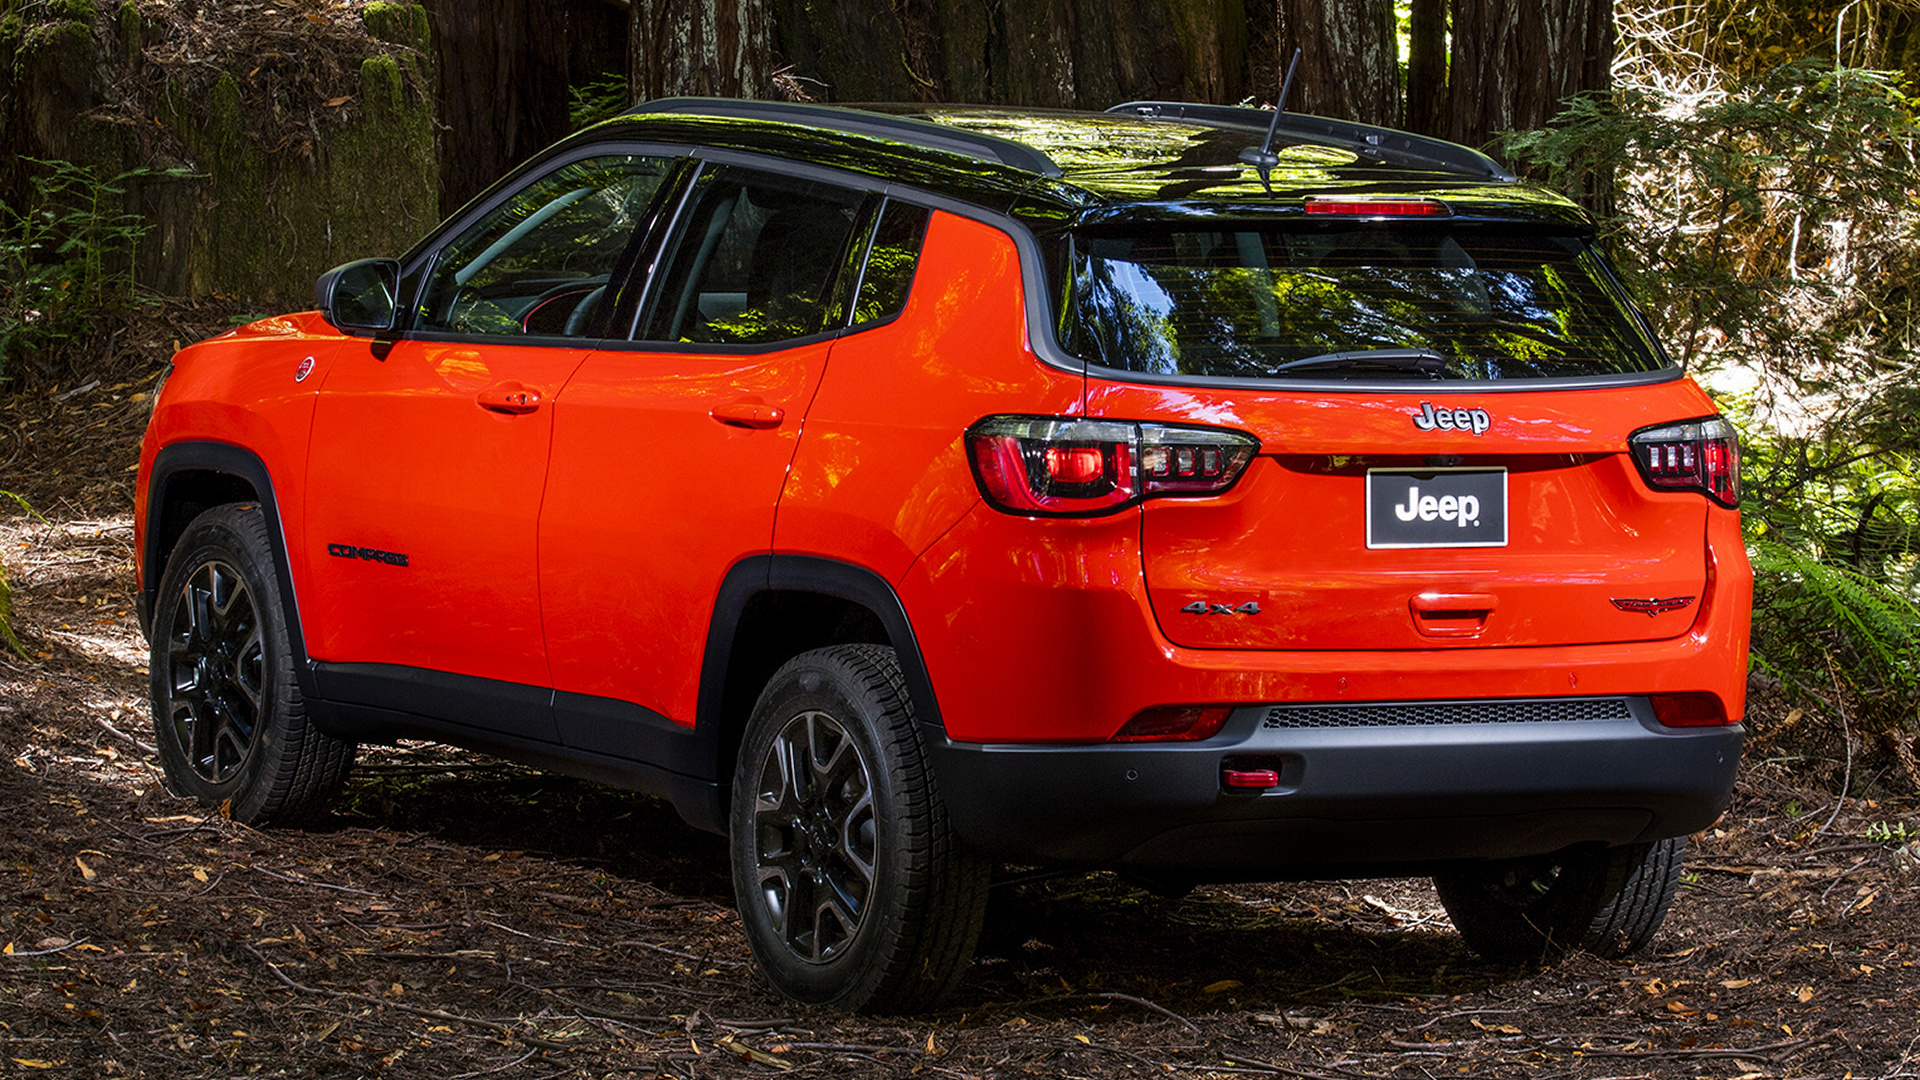 Jeep Compass - Download Free HD Mobile Wallpapers